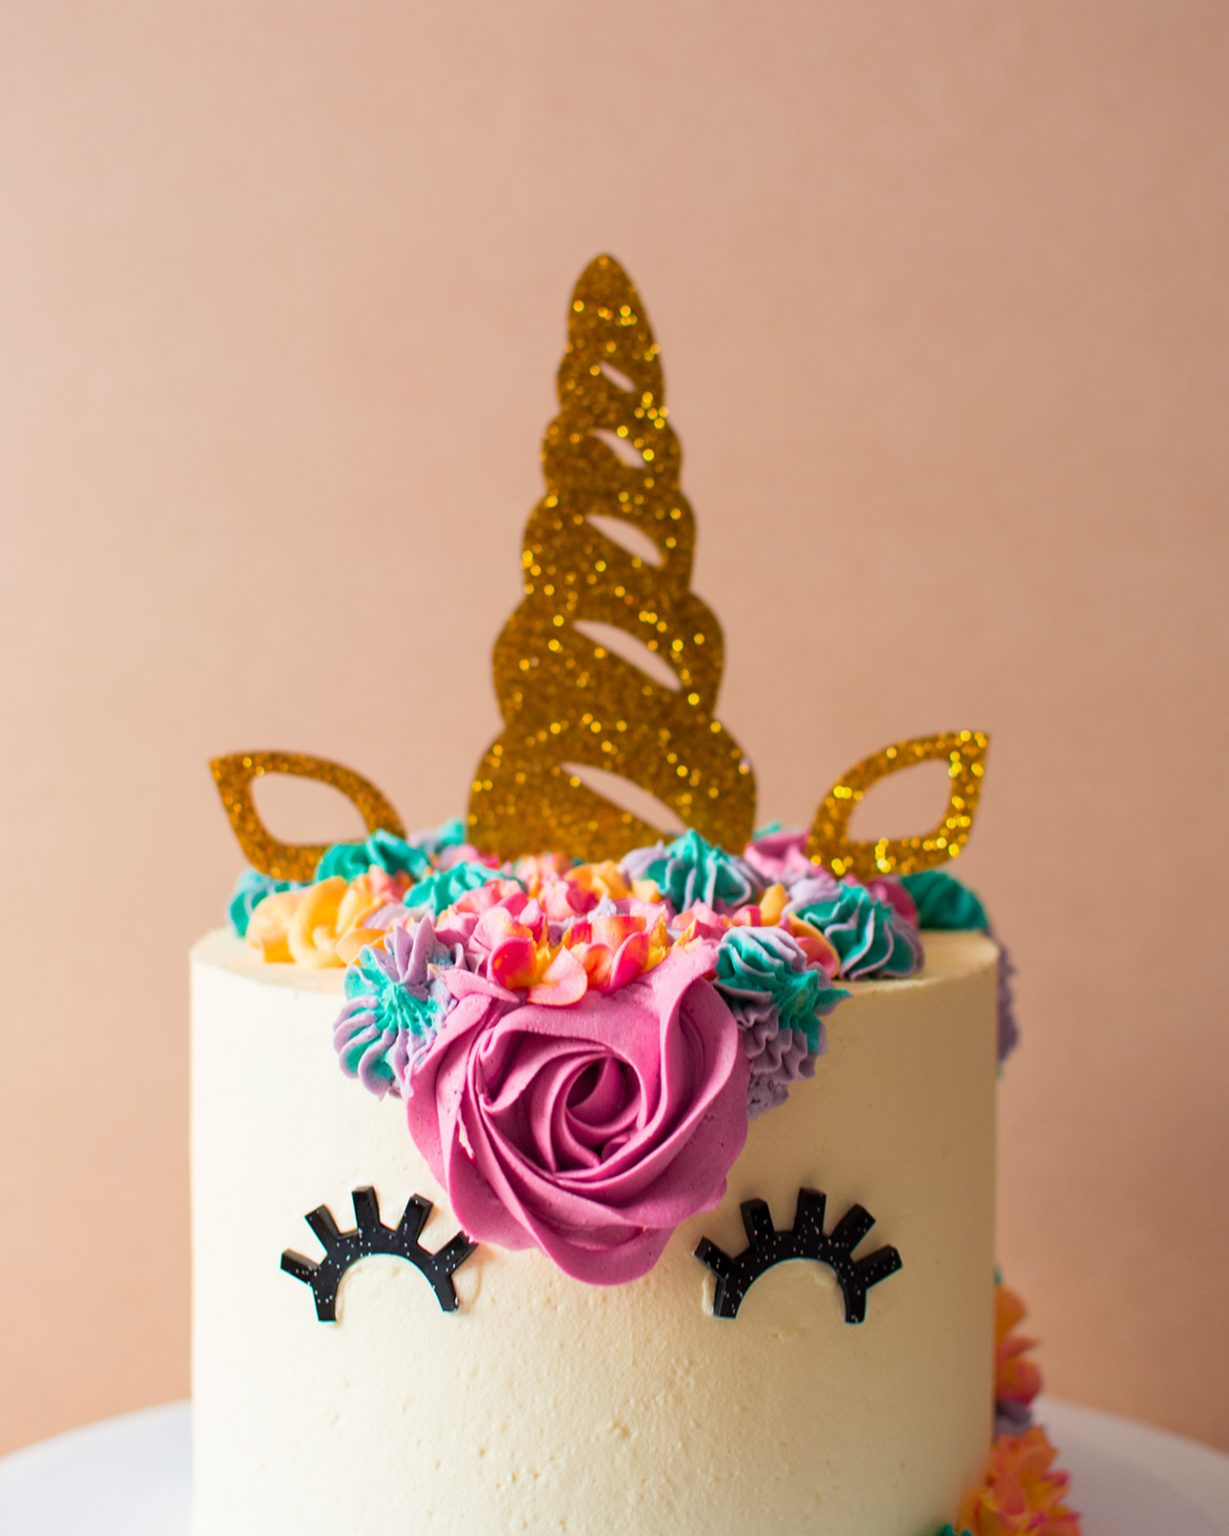 a close up image of an unicorn cake with colourful icing for a birthday